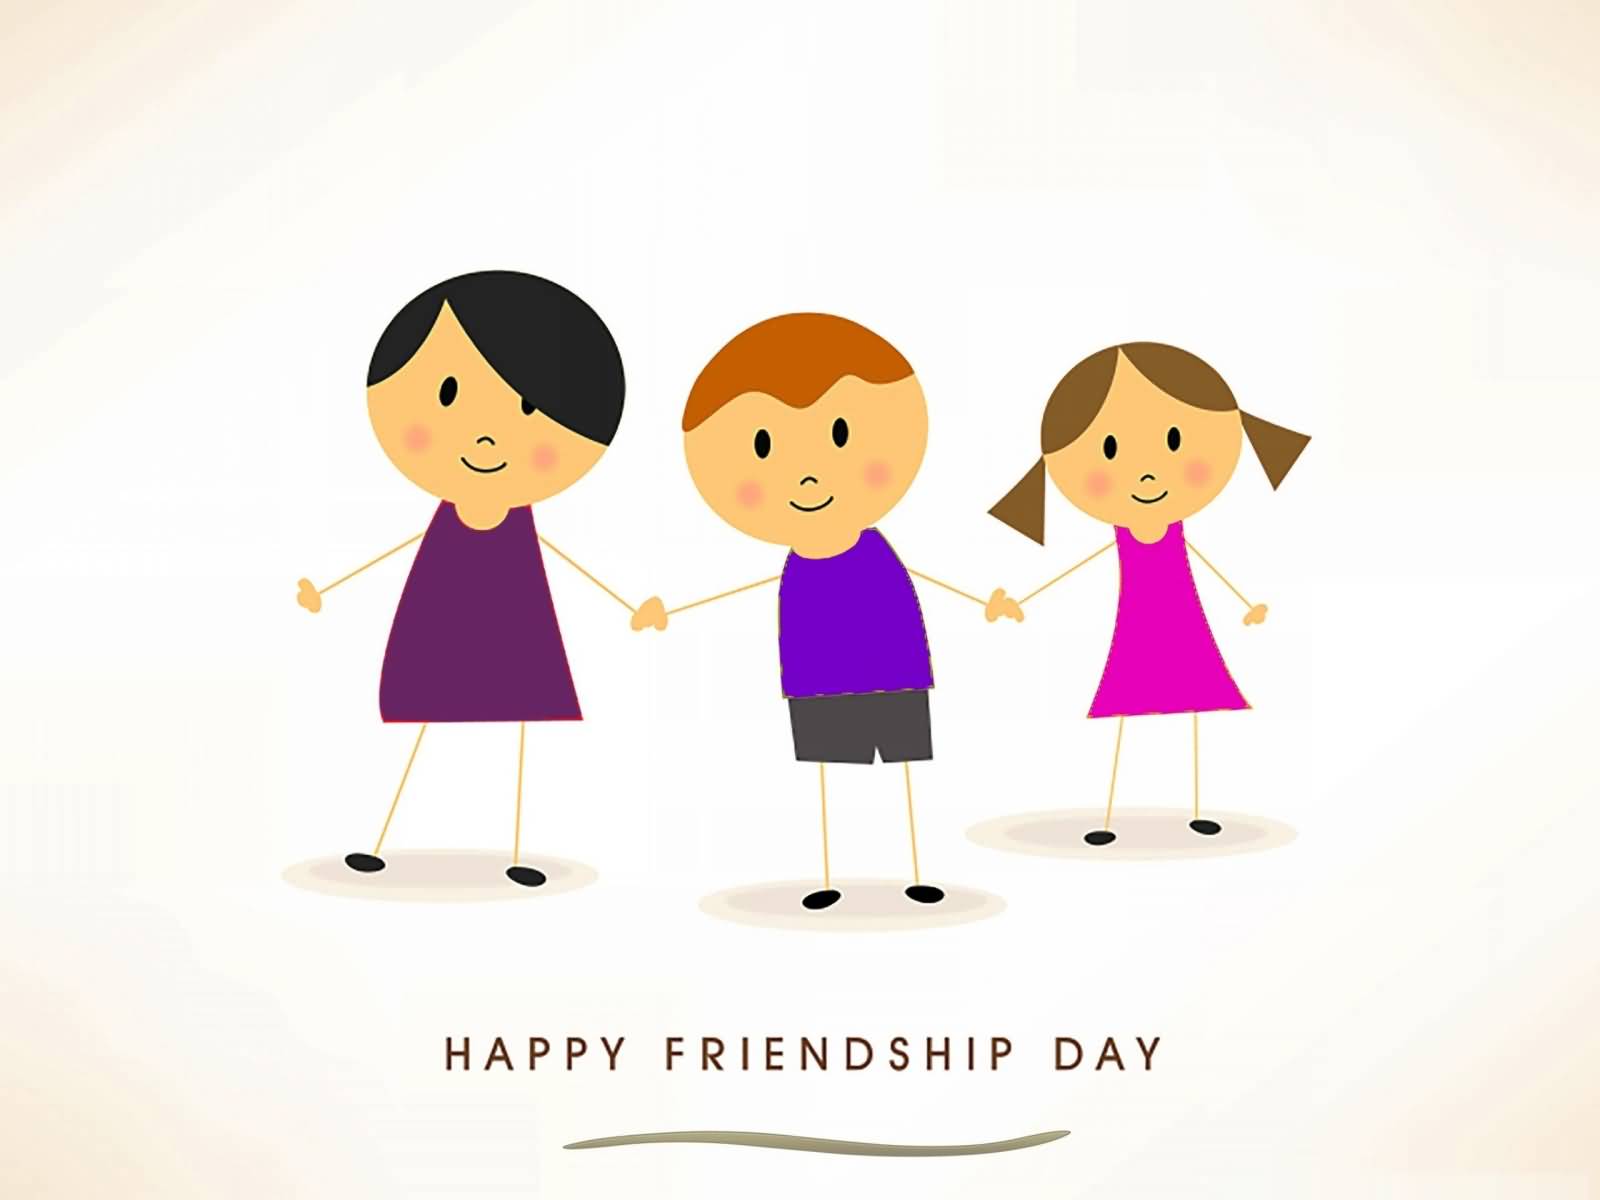 Best Happy Friendship Day Greetings To Share With Friends